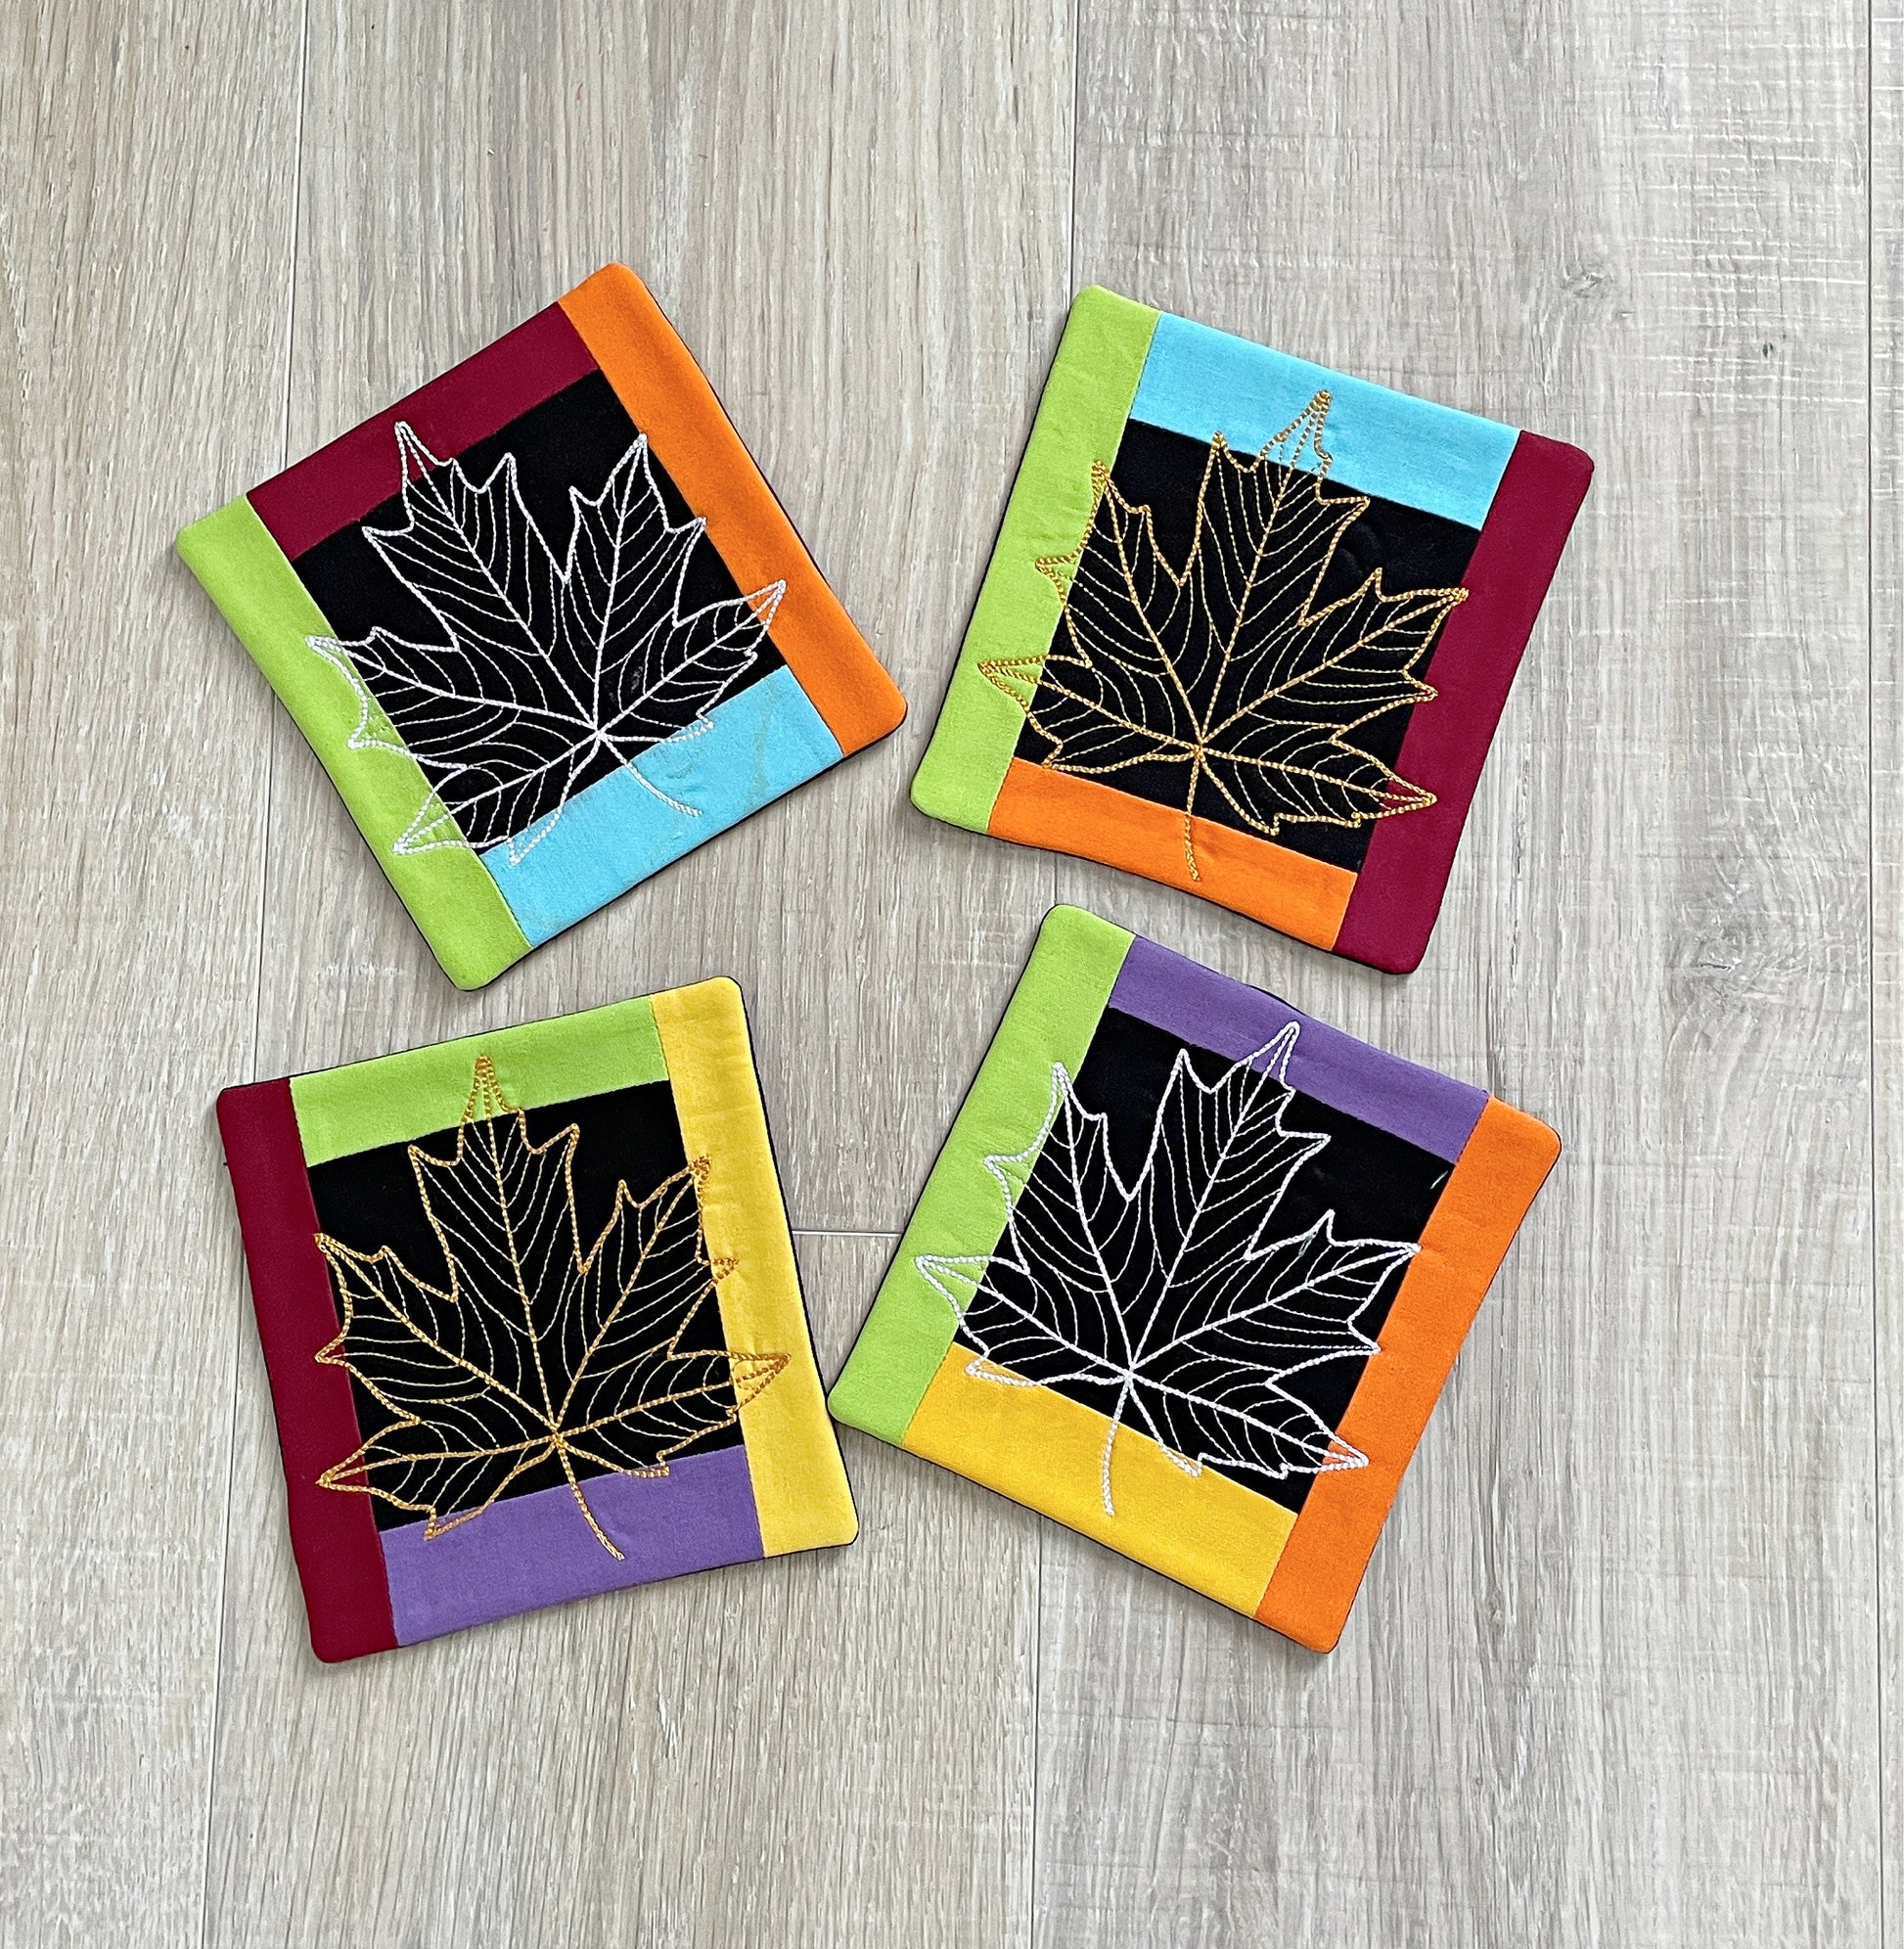 set of 4 fabric coasters for fall with machine embroidery of a maple leaf in the center of each coaster.